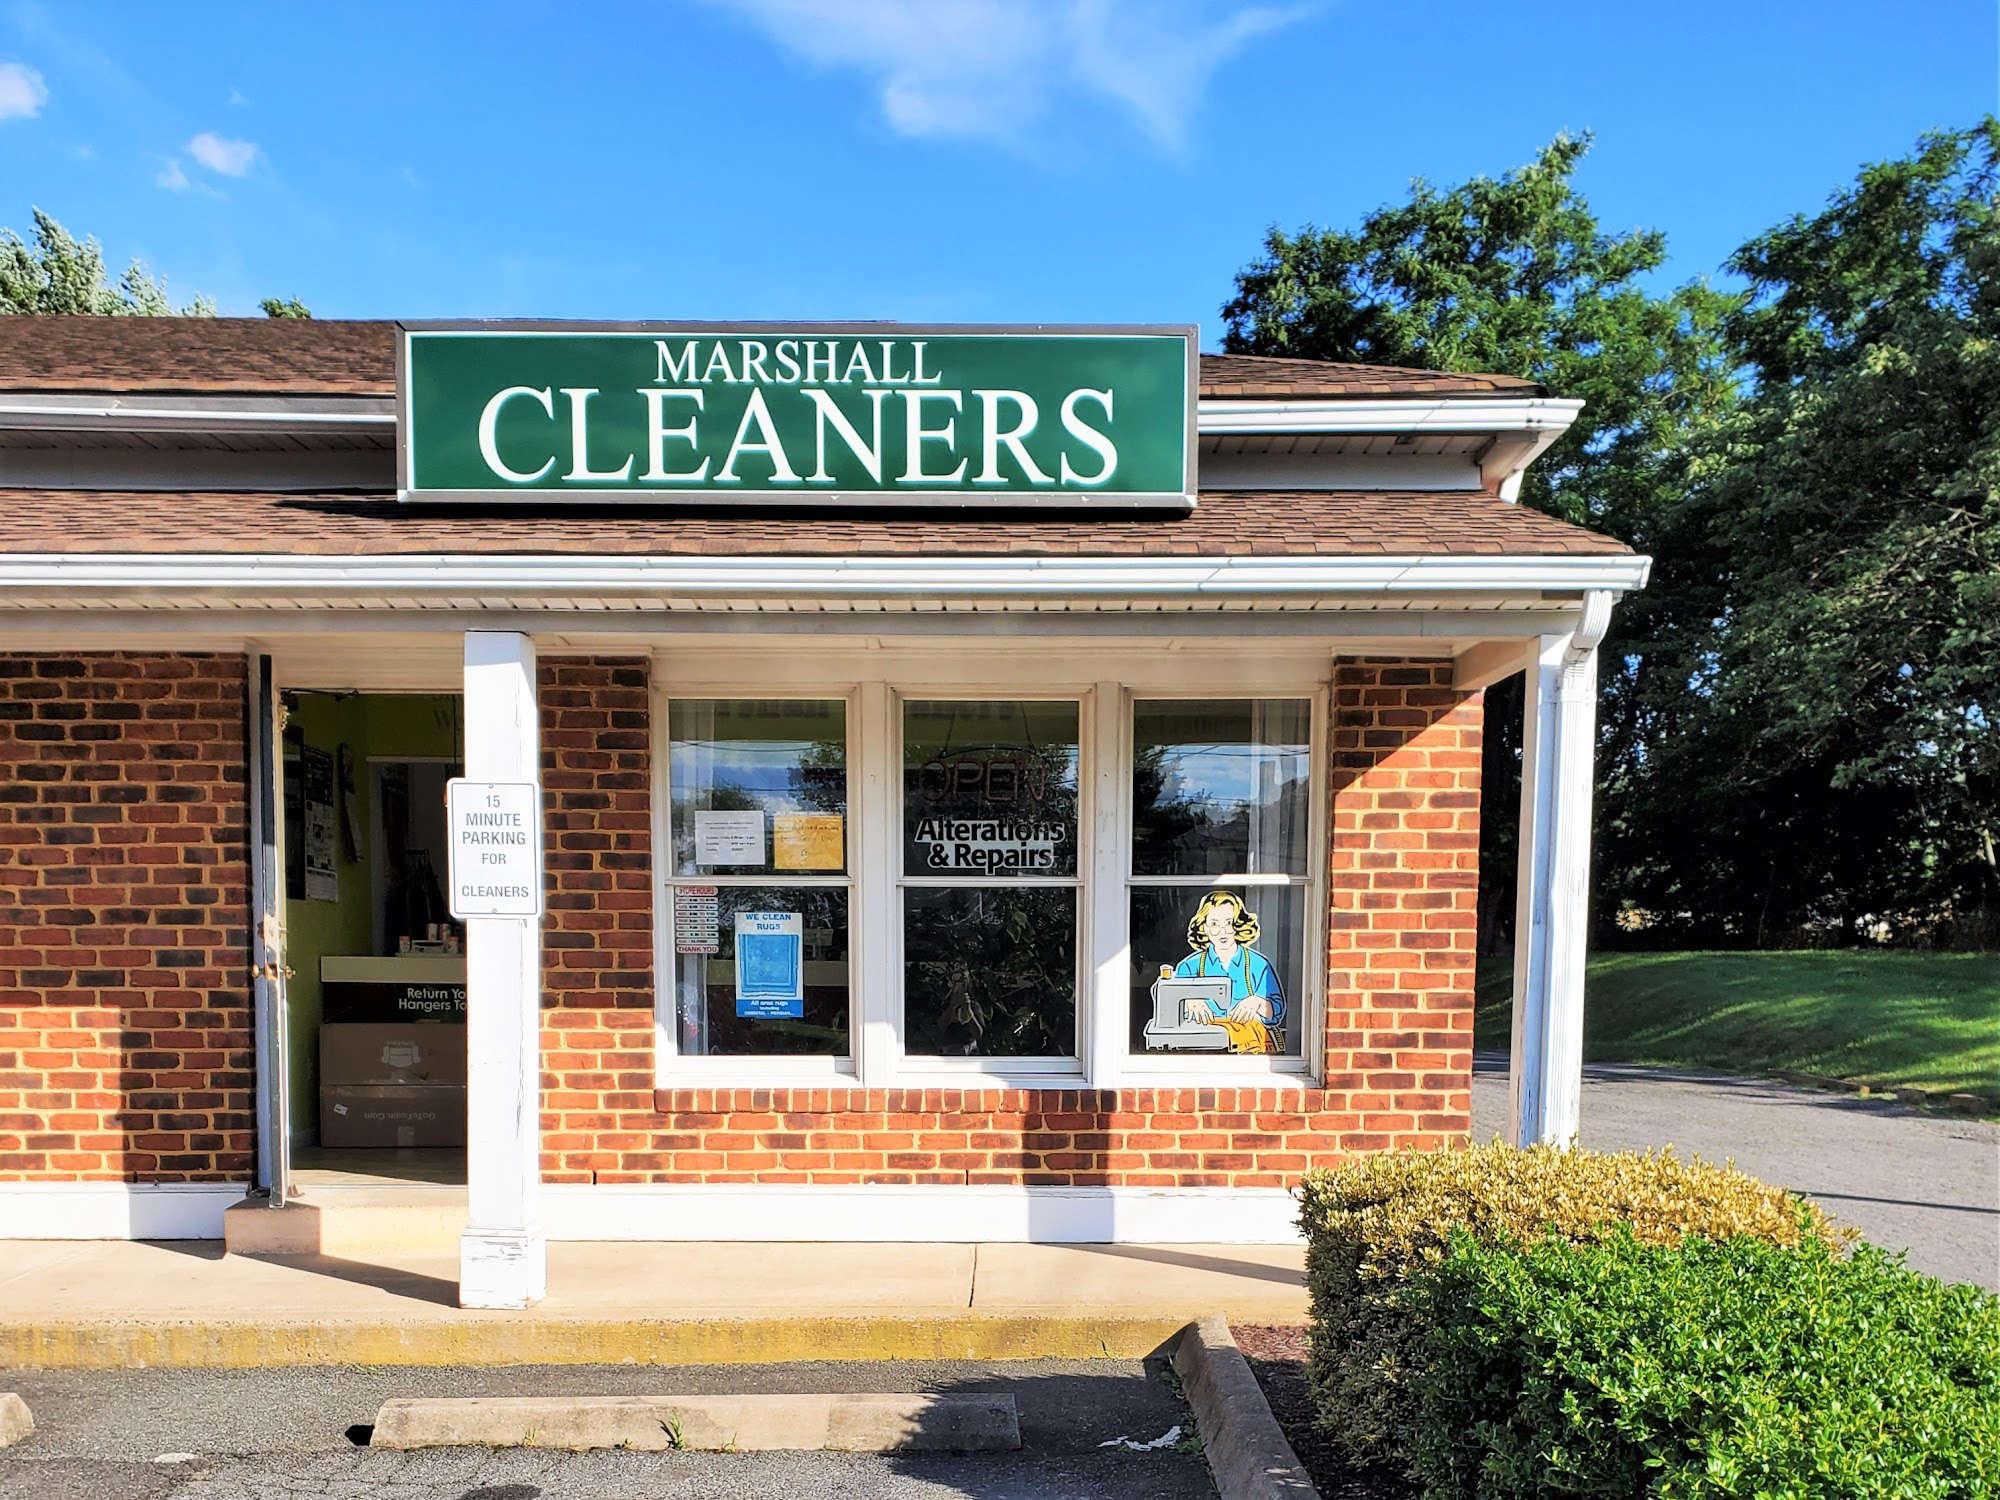 Marshall Cleaners